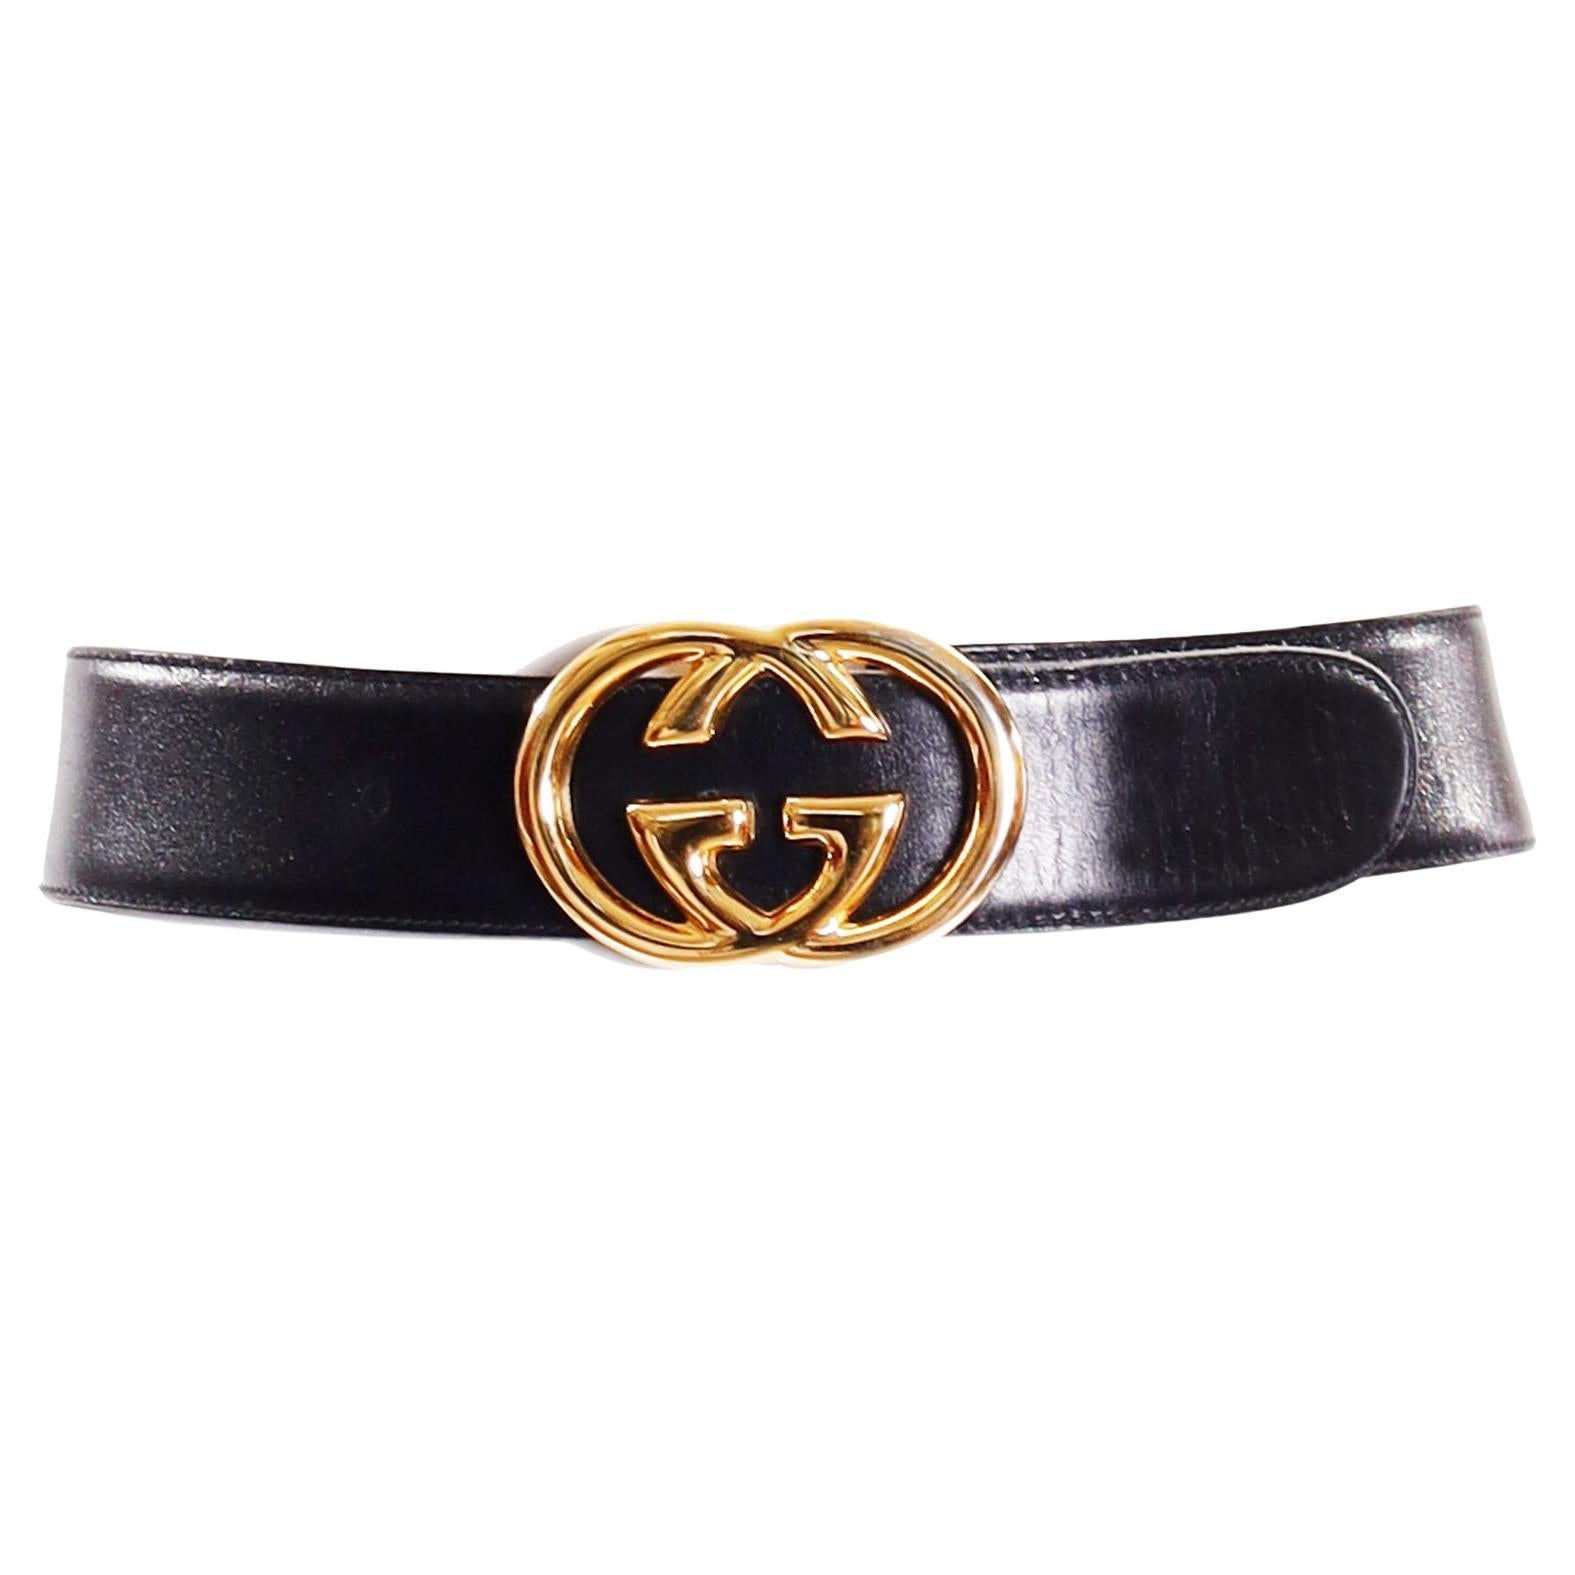 Vintage Gucci Black Leather Belt with Gold Double G Buckle 75-30